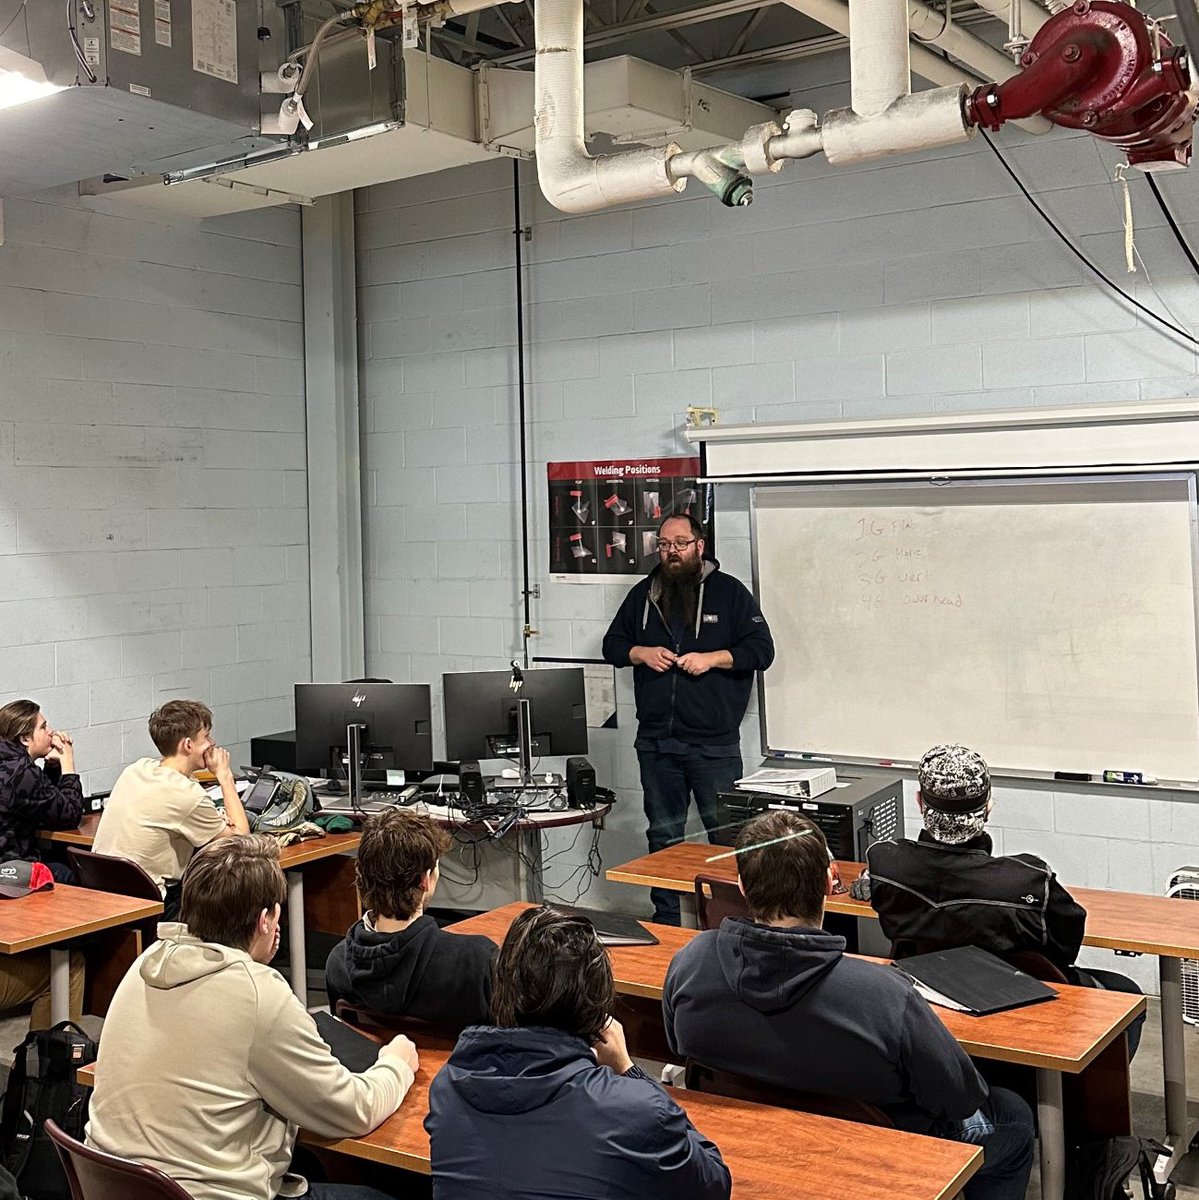 We'd like to thank Brandon Bentley of Haun Welding Supply and Cal Manning of the Haun School of Welding for visiting our senior welding class! Students learned what the American Welding Society Certification test consists of and received tips on new techniques to try in the shop!